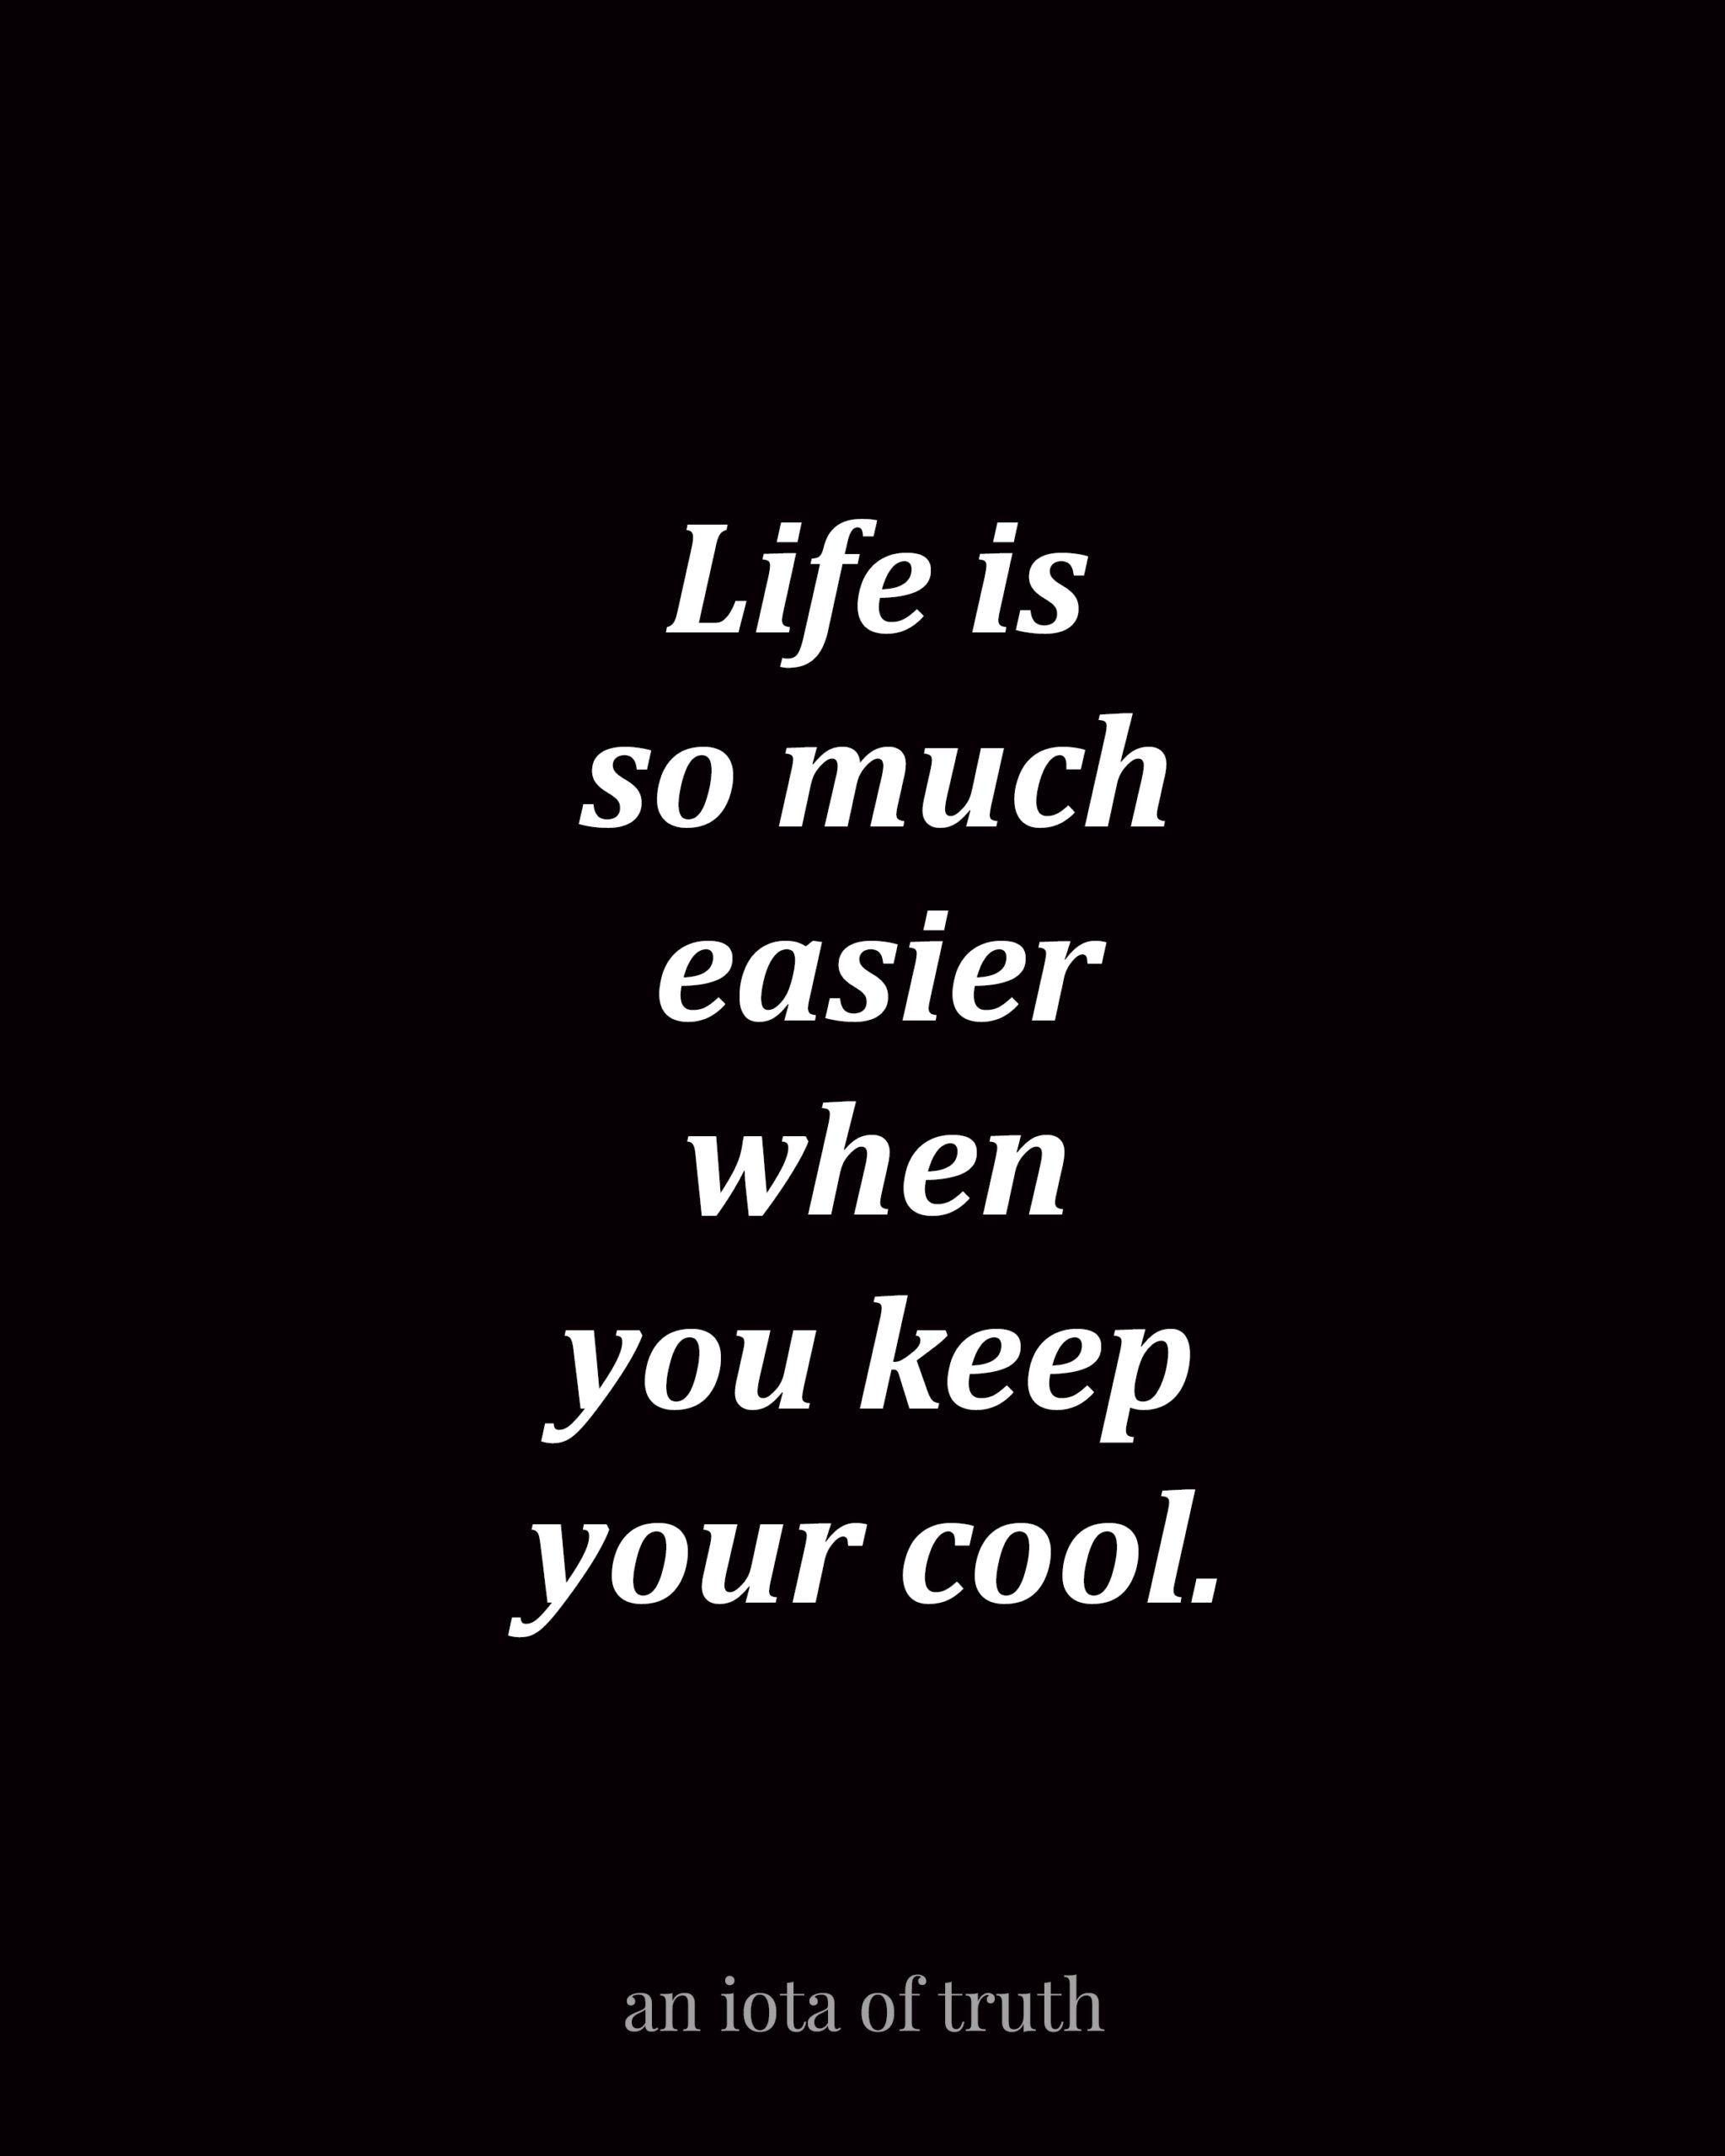 Life is so much easier when you keep your cool.